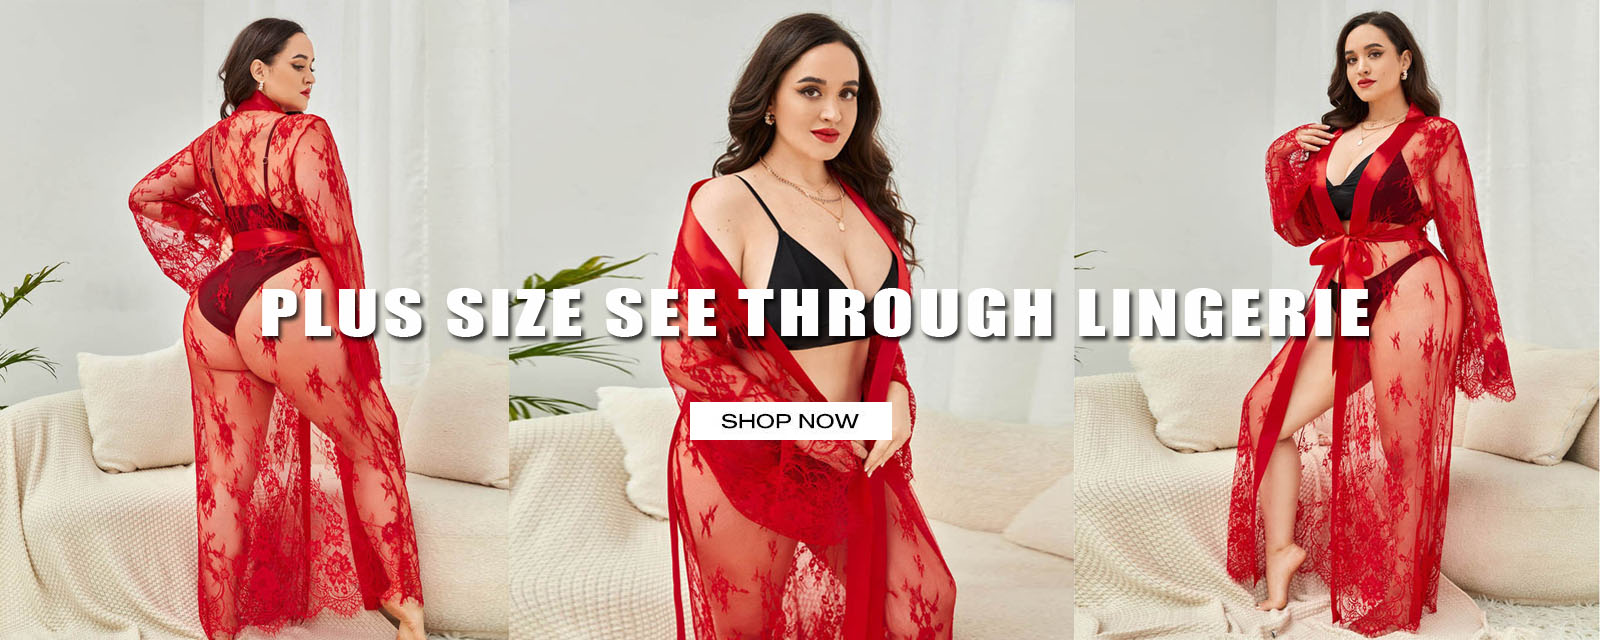 plus size see through lingerie